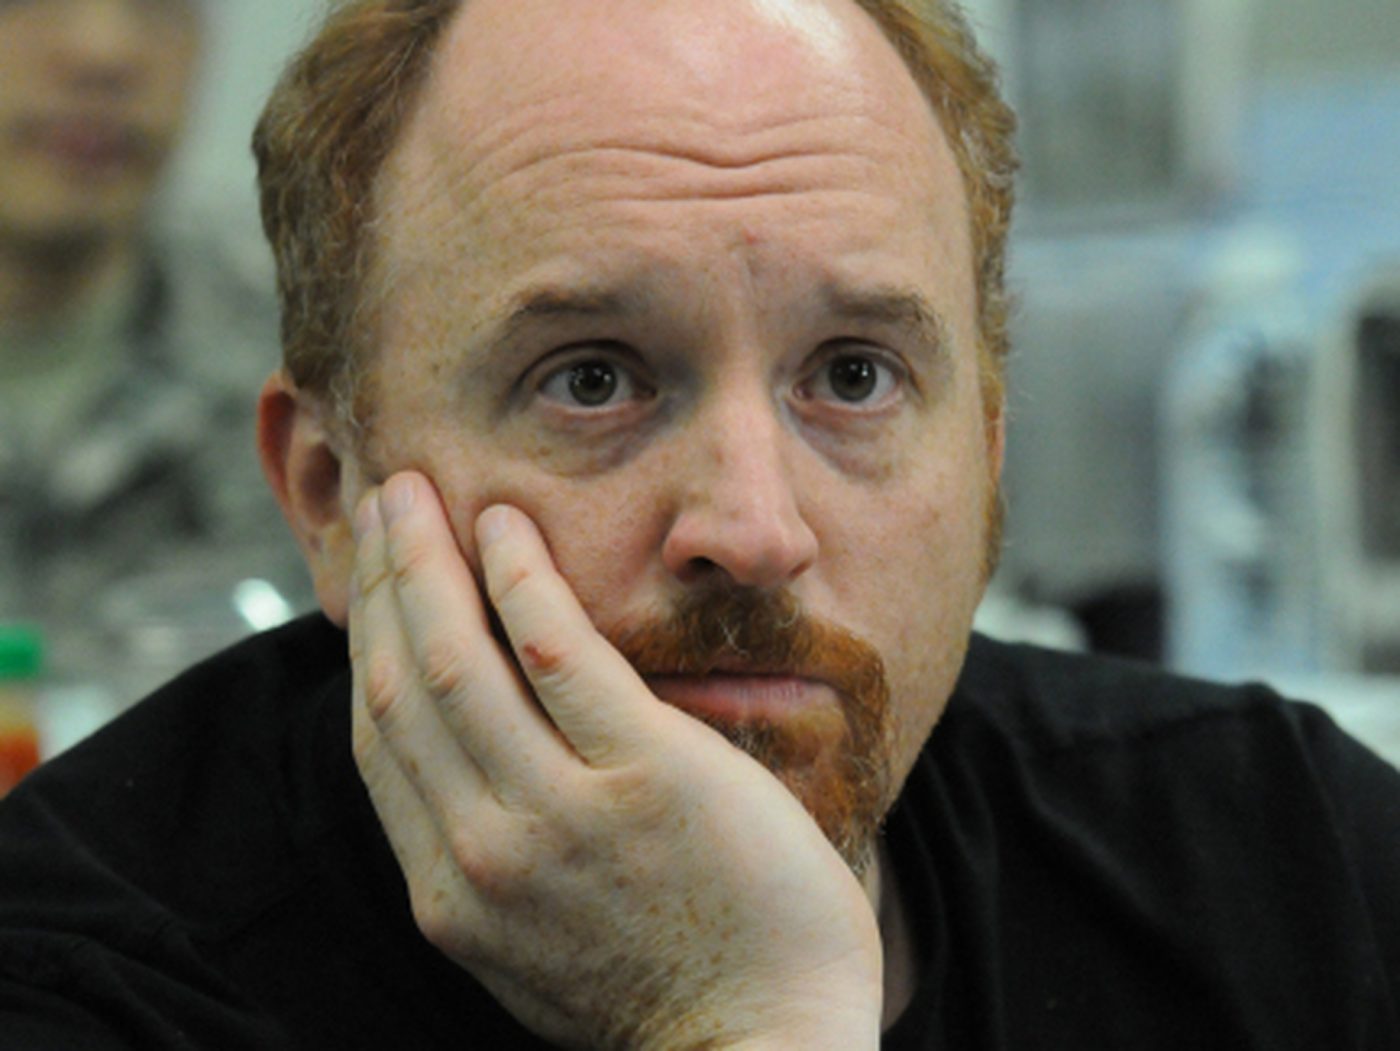 Louis C.K.: The hell, man?